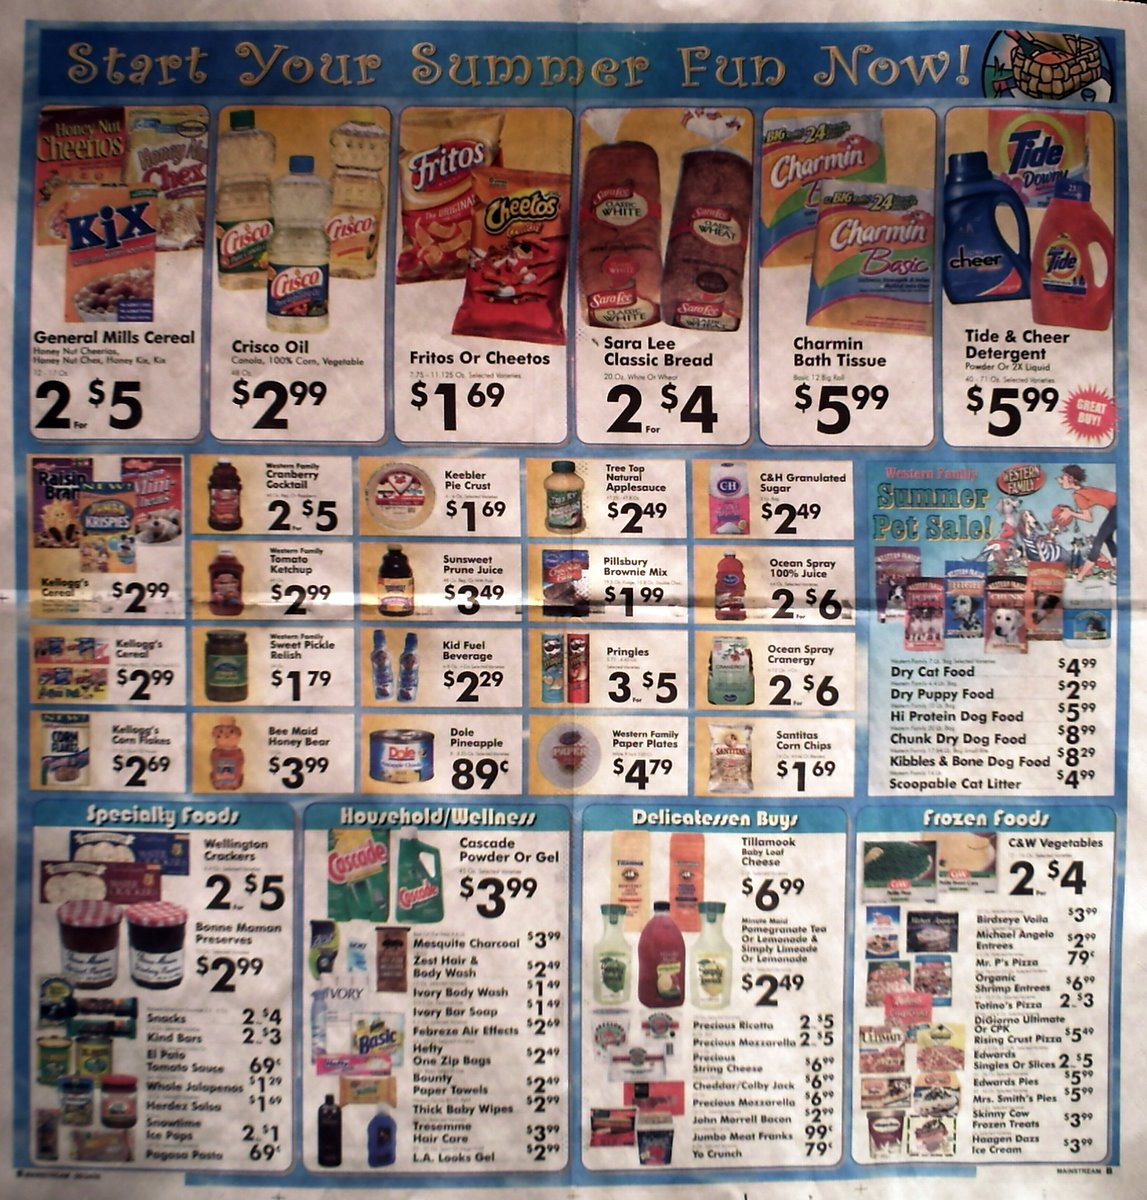 Big Trees Market Weekly Ad for June 24 - 30, 2009